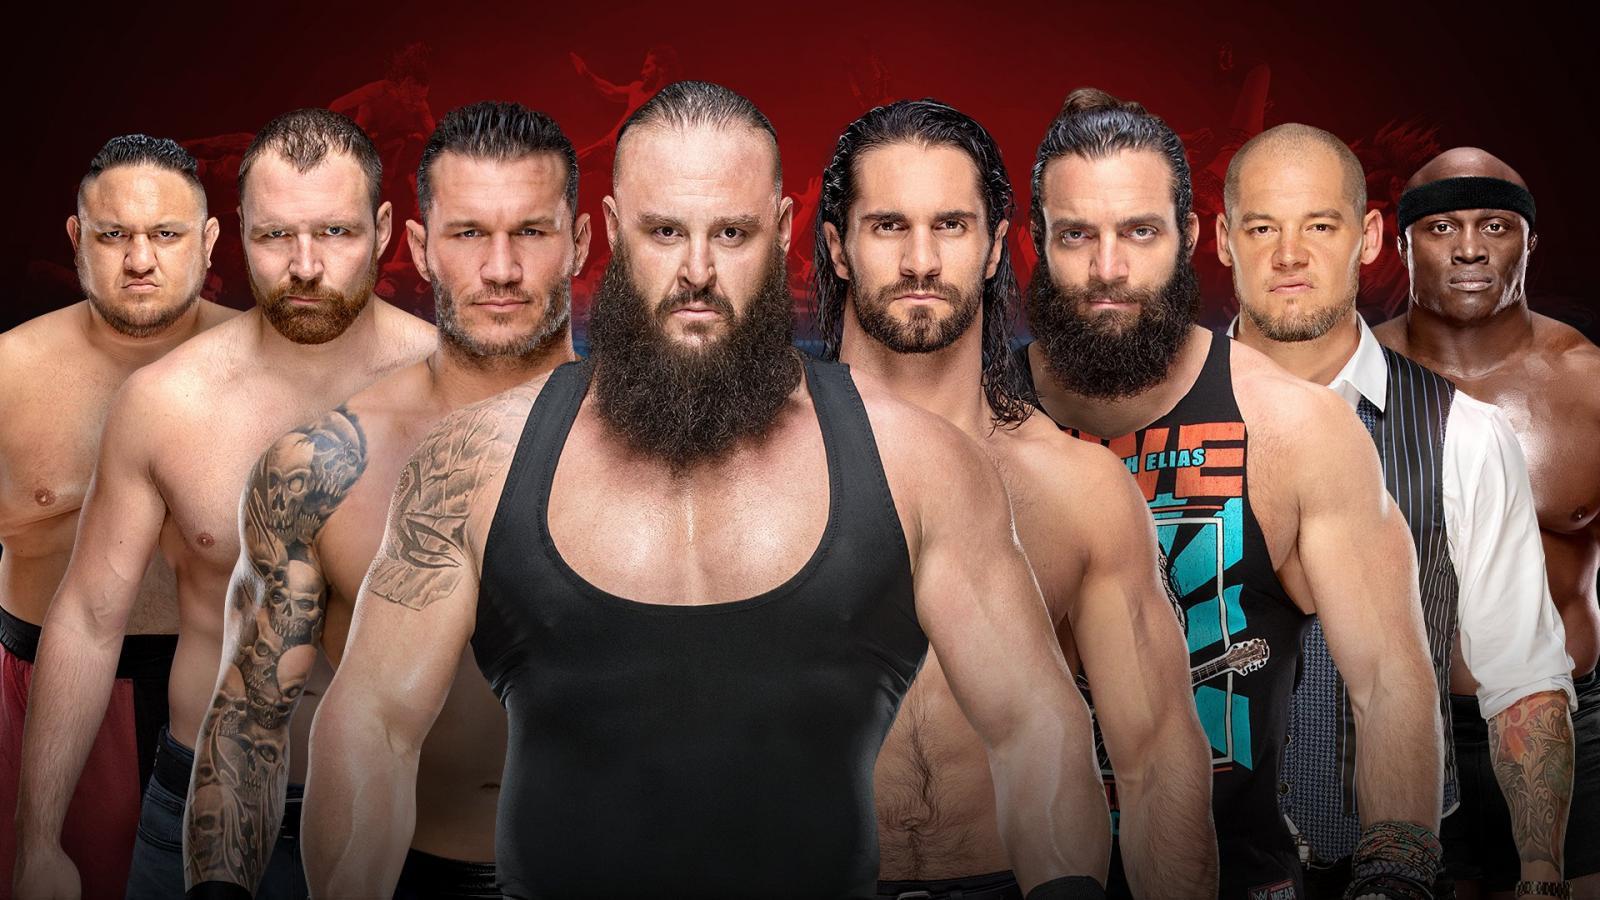 WWE Superstars give their thoughts ahead of the WWE Royal Rumble